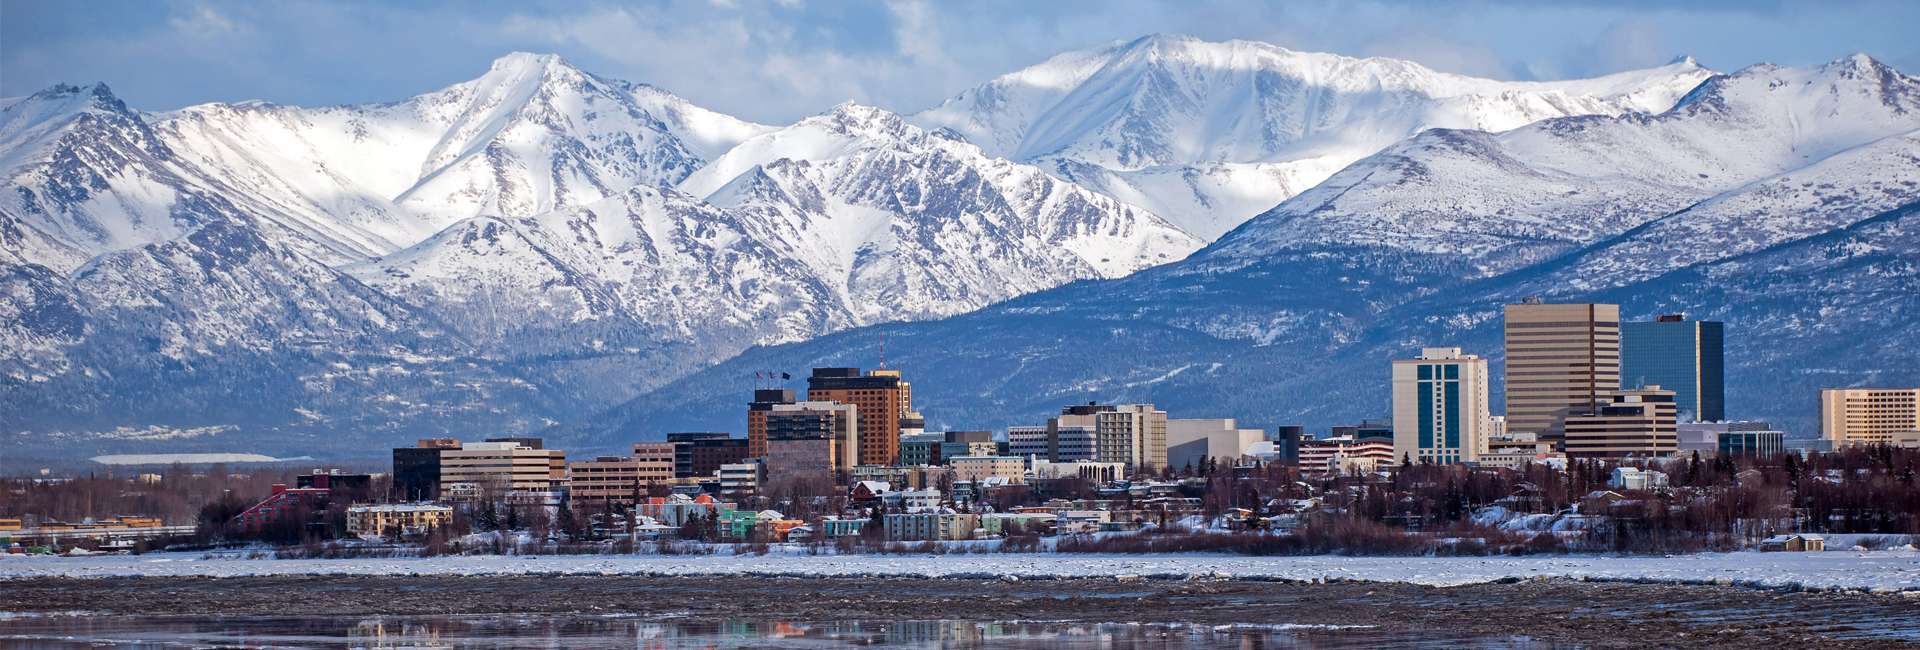 Anchorage, Alaska skyline with mountains in the background and reflection inwater